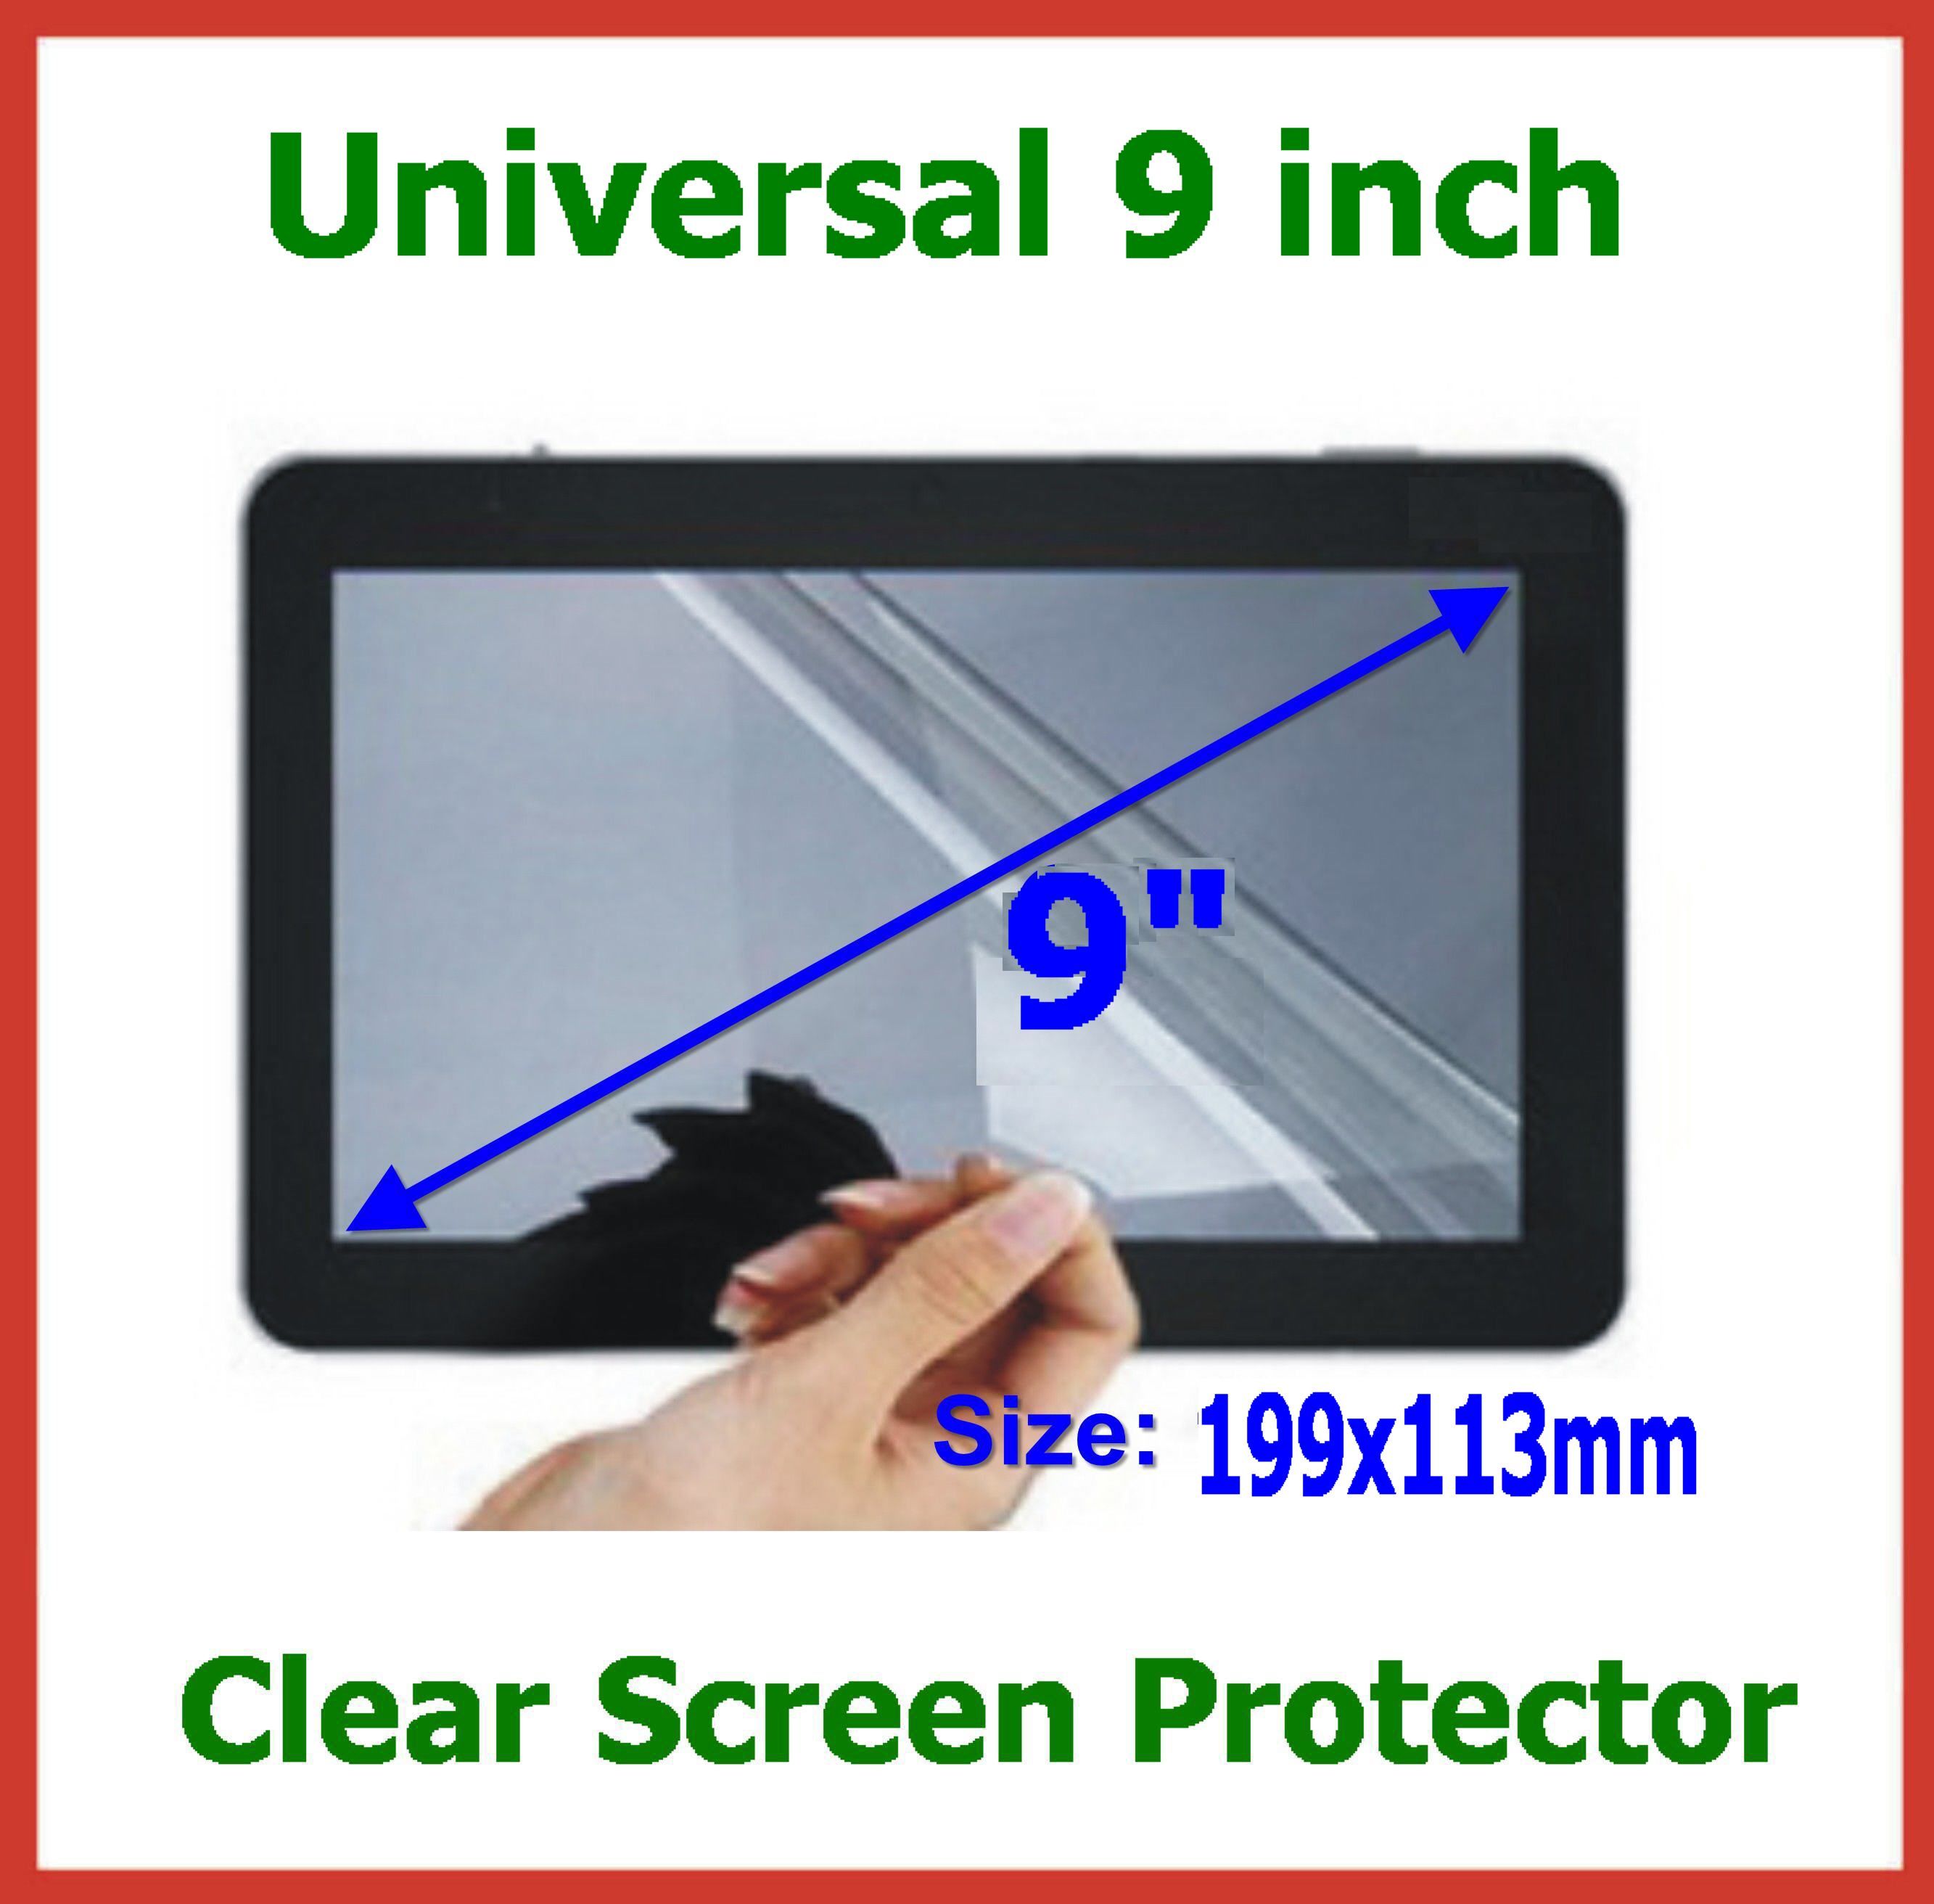 20pcs Universal LCD Screen Protector Protective Film 9 inch NOT Full-Screen Size 199x113mm for Tablet PC GPS Mobile Phone